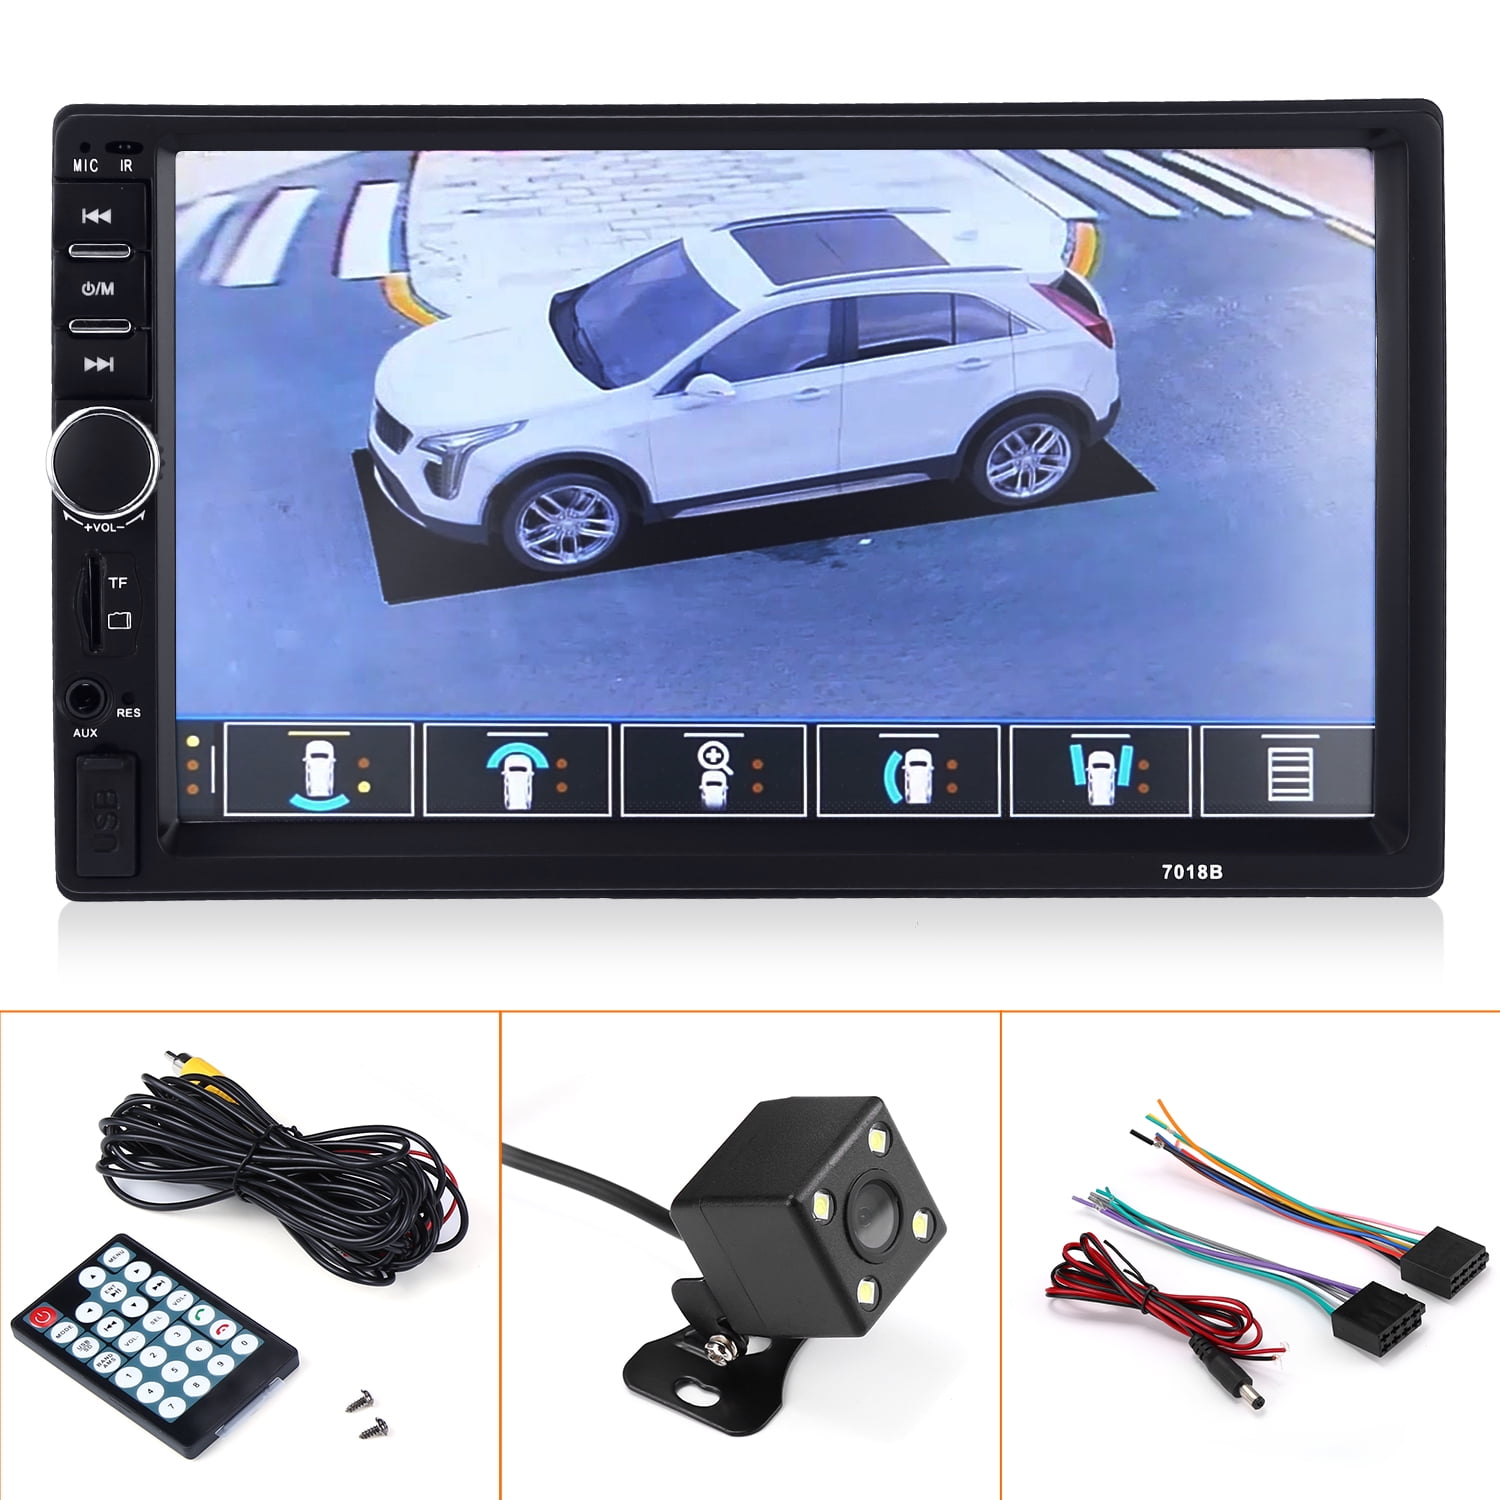 Double 2Din 6.2" Car Stereo Radio BT FM MirrorLink MP5 Touchscreen Player Camera 